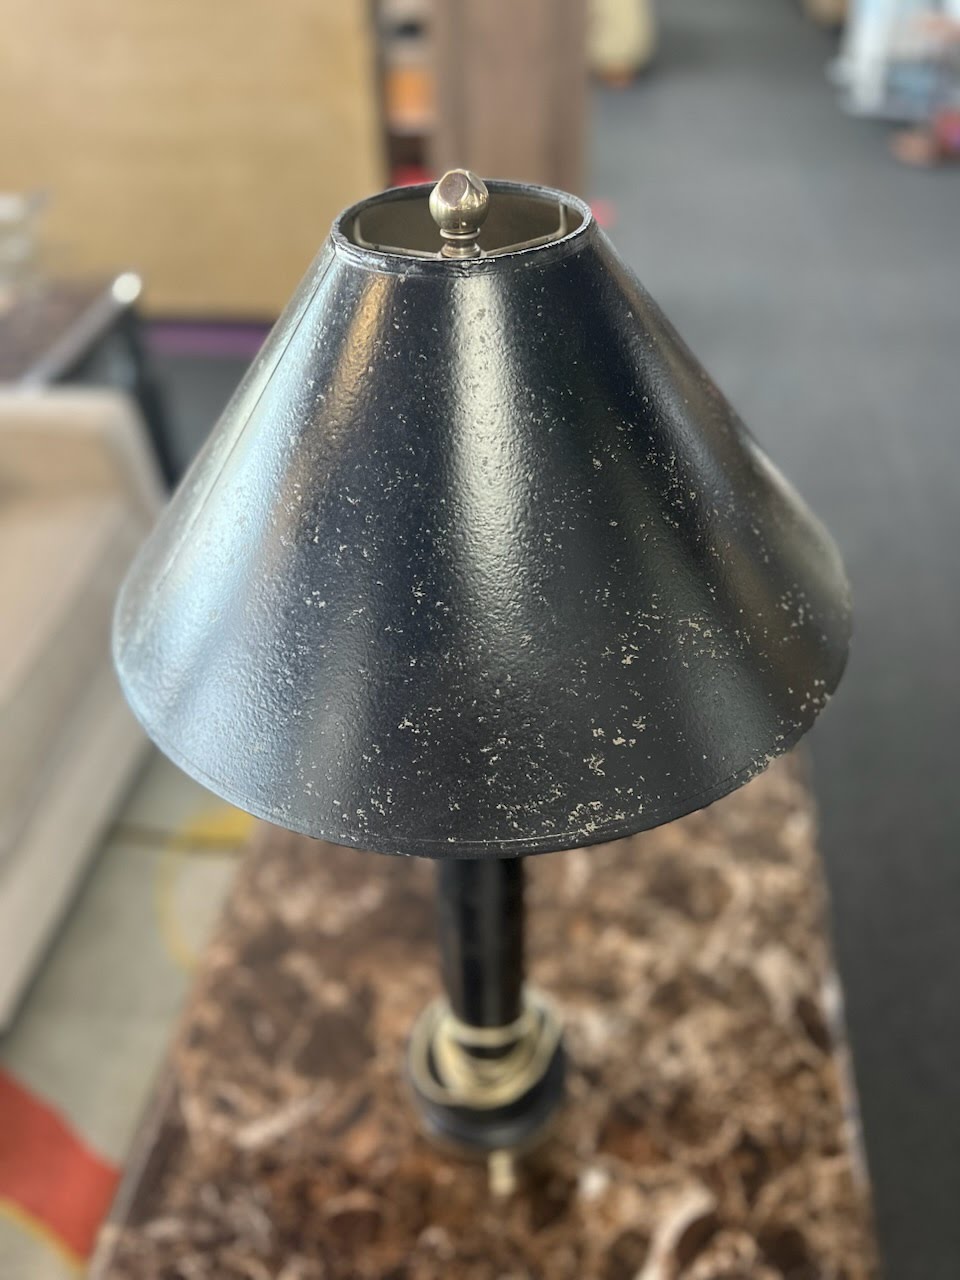 Two Tone Table Lamp